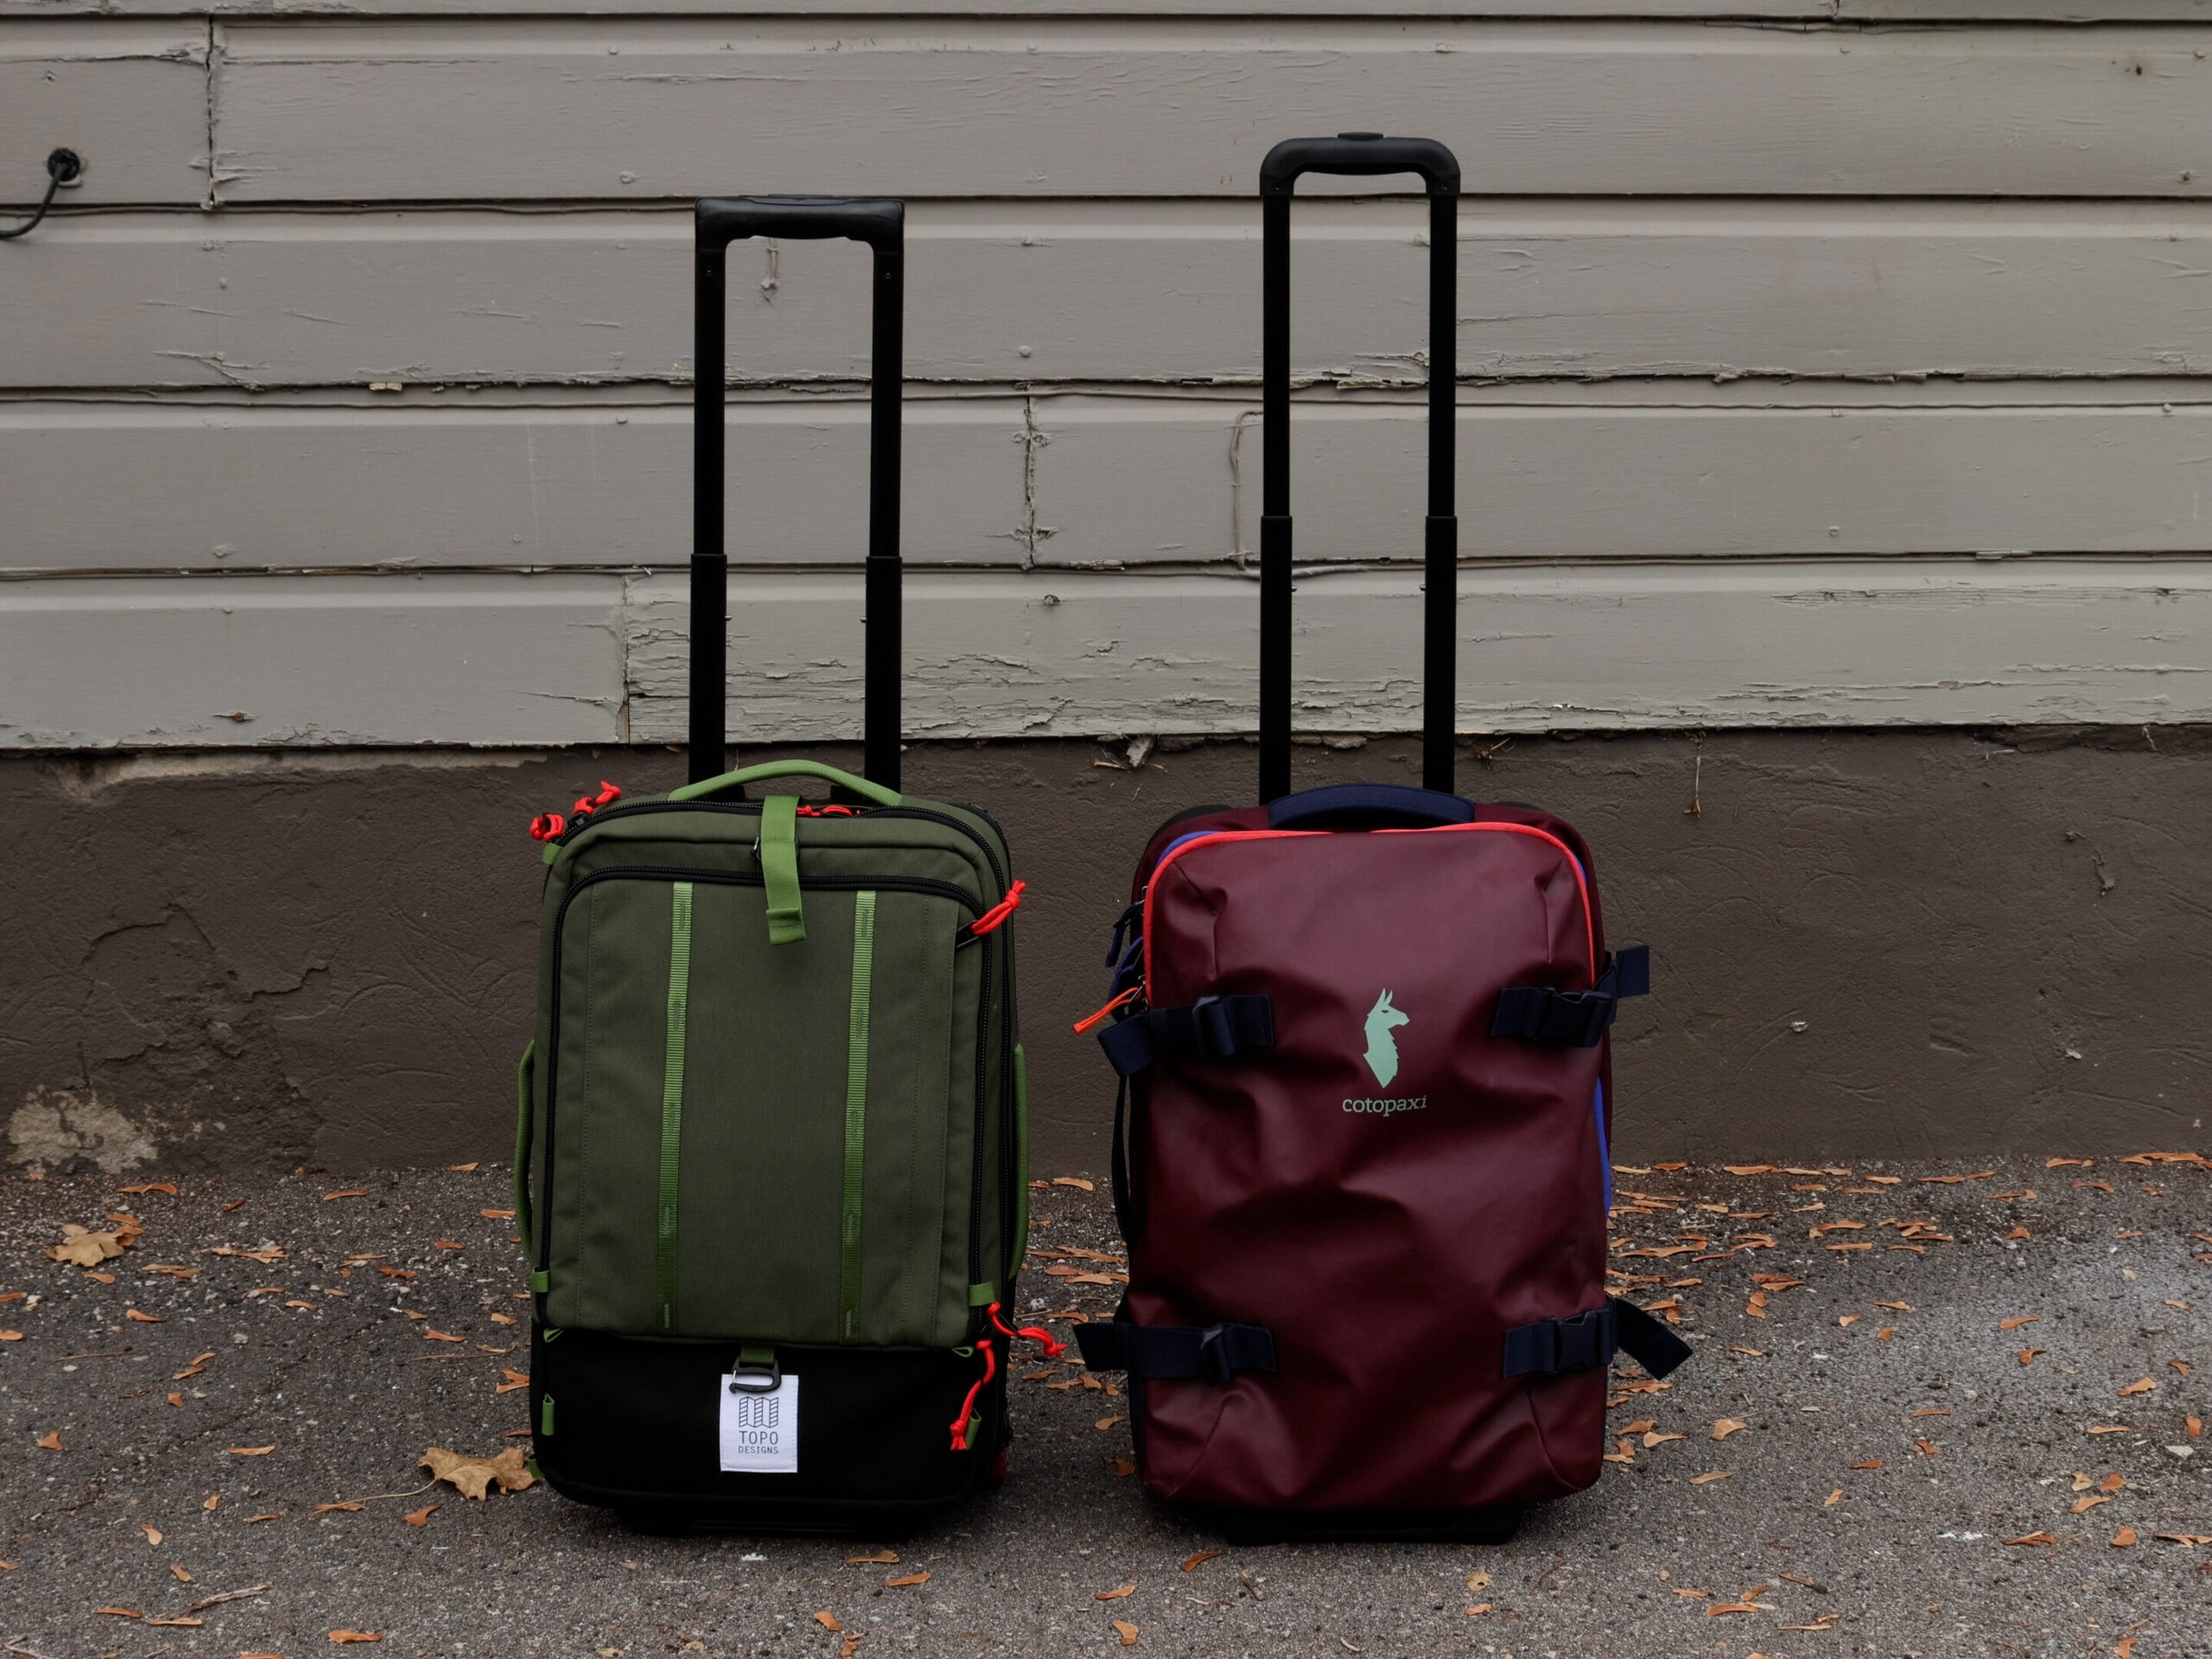 The Topo Designs carry-on bag (left) and the Cotopaxi Allpa (right) with handles fully extended.